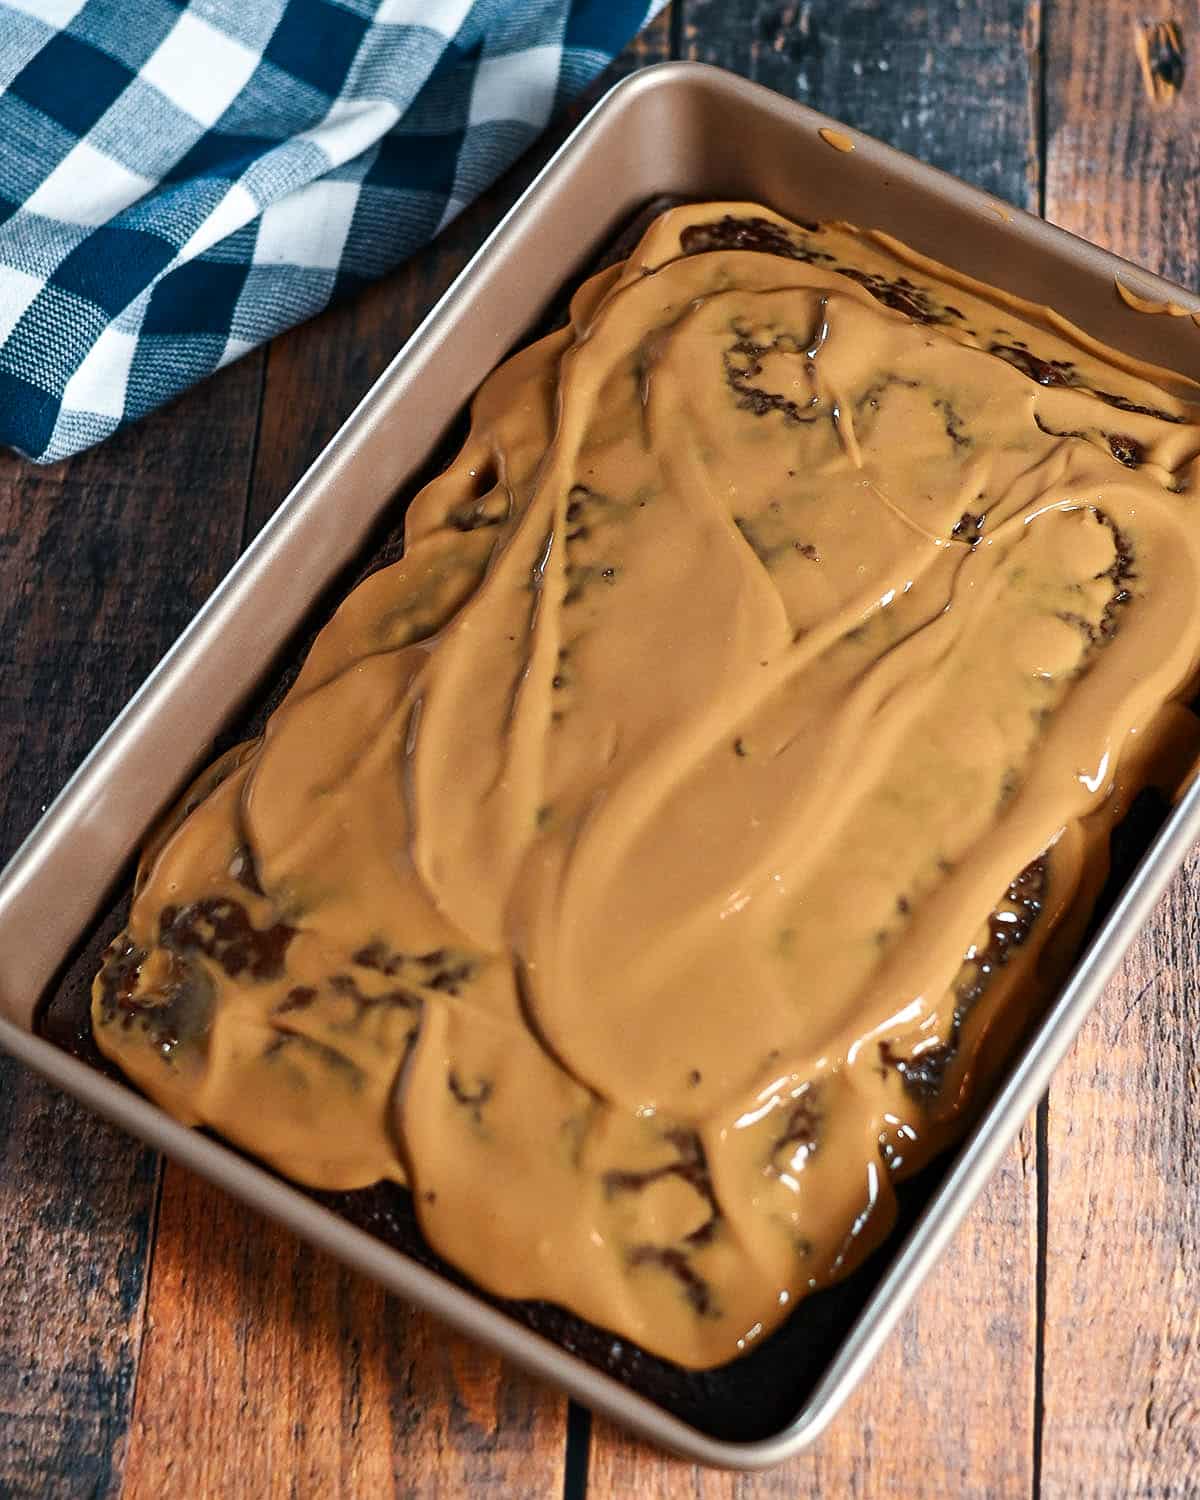 Coffee flavored pudding poured over chocolate cake.